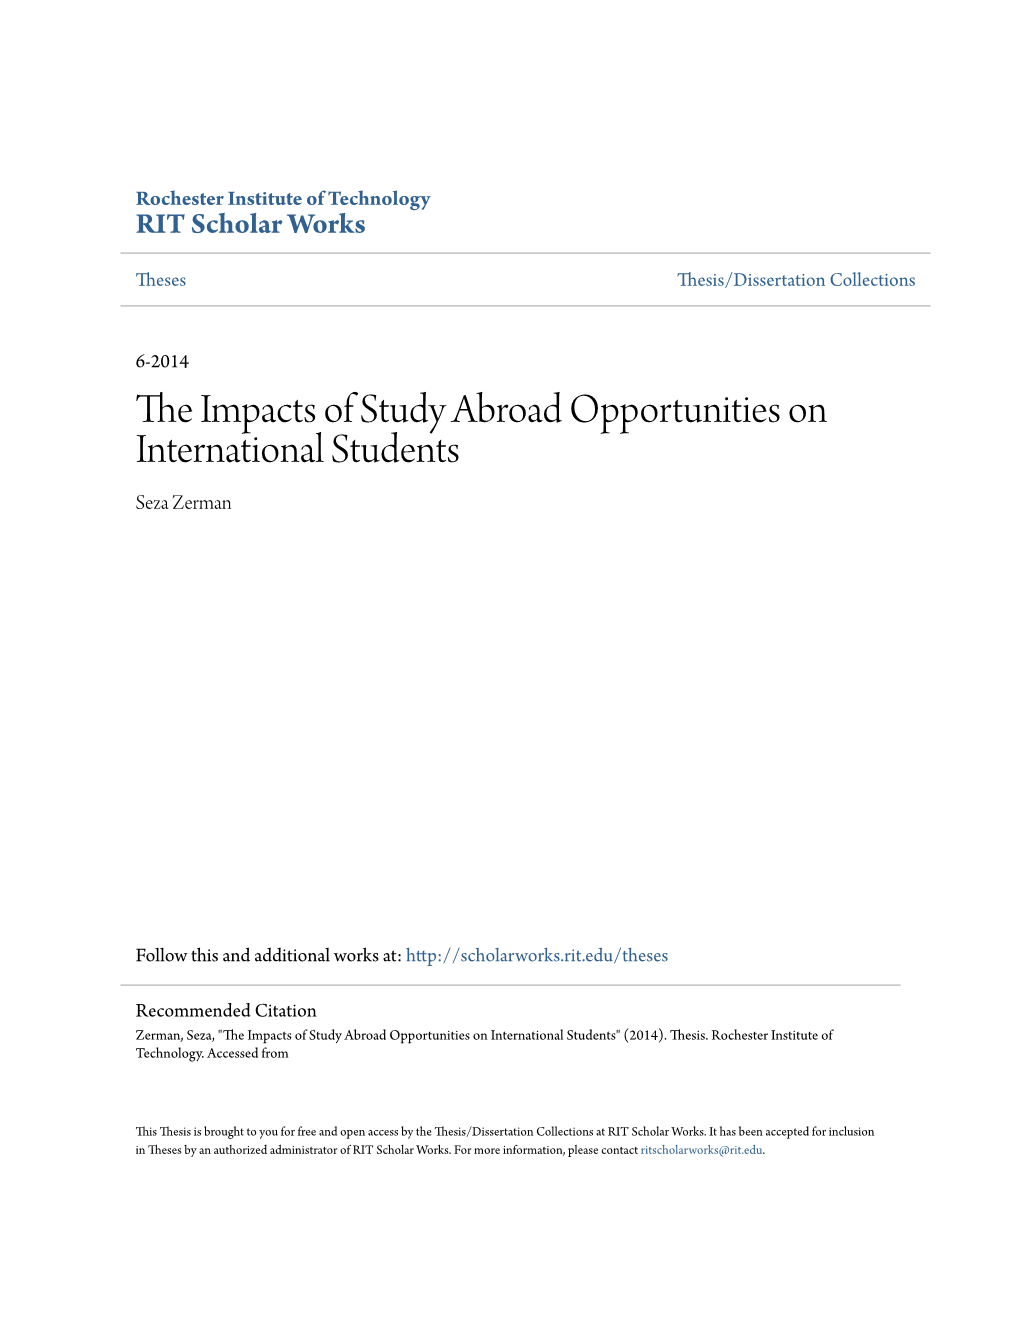 The Impacts of Study Abroad Opportunities on International Students